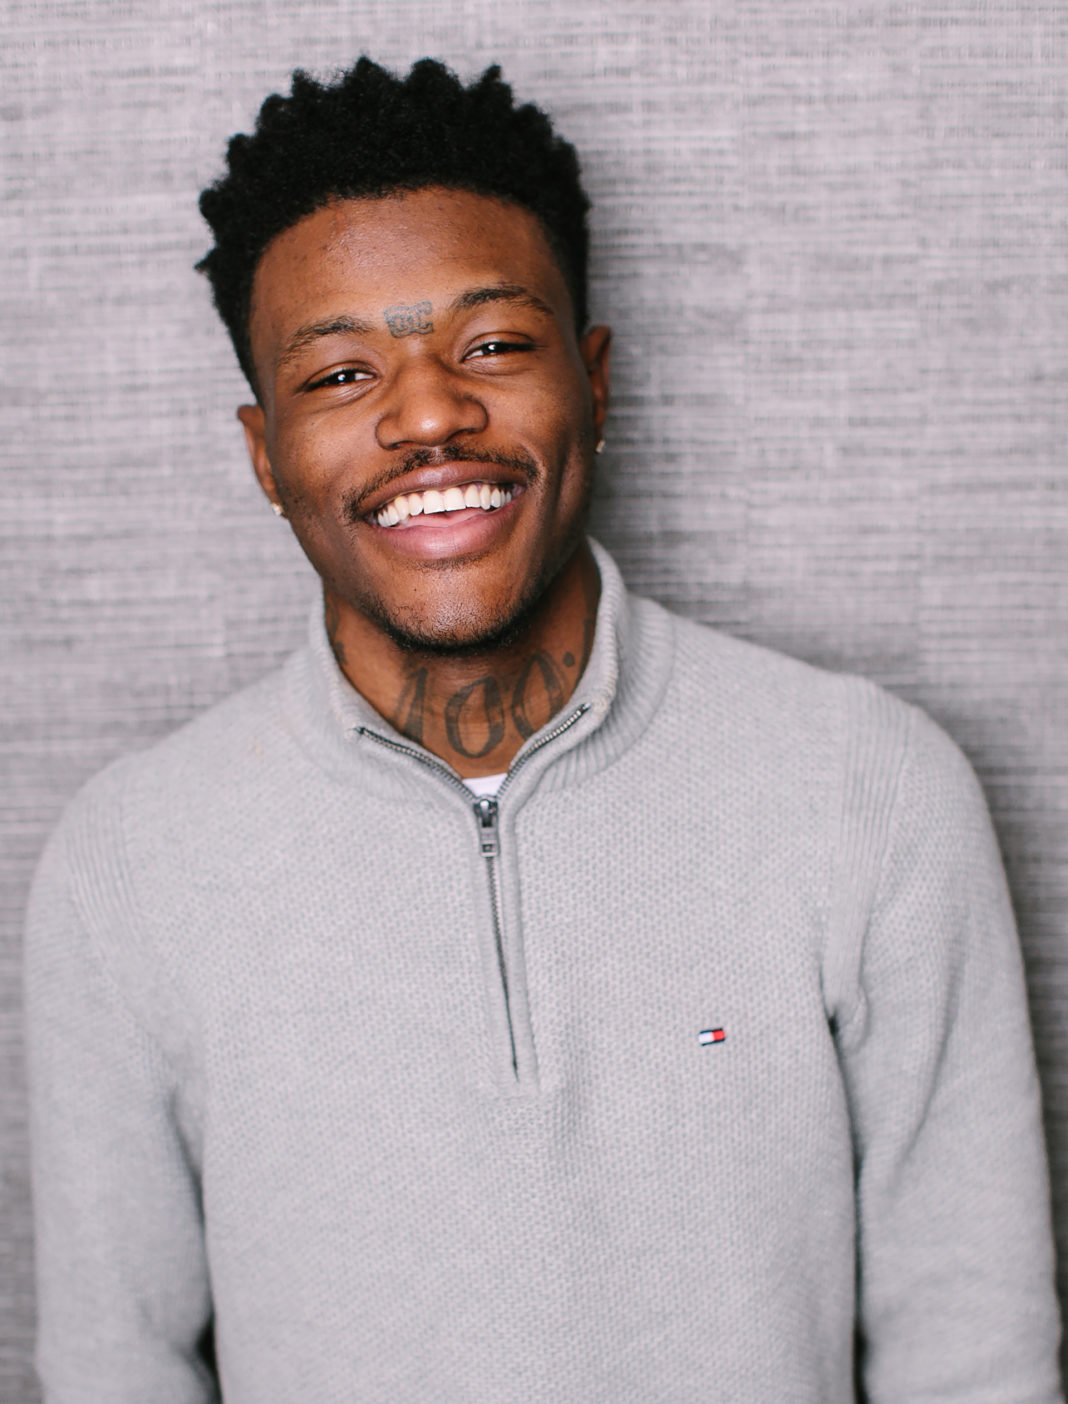 DcYoungFly